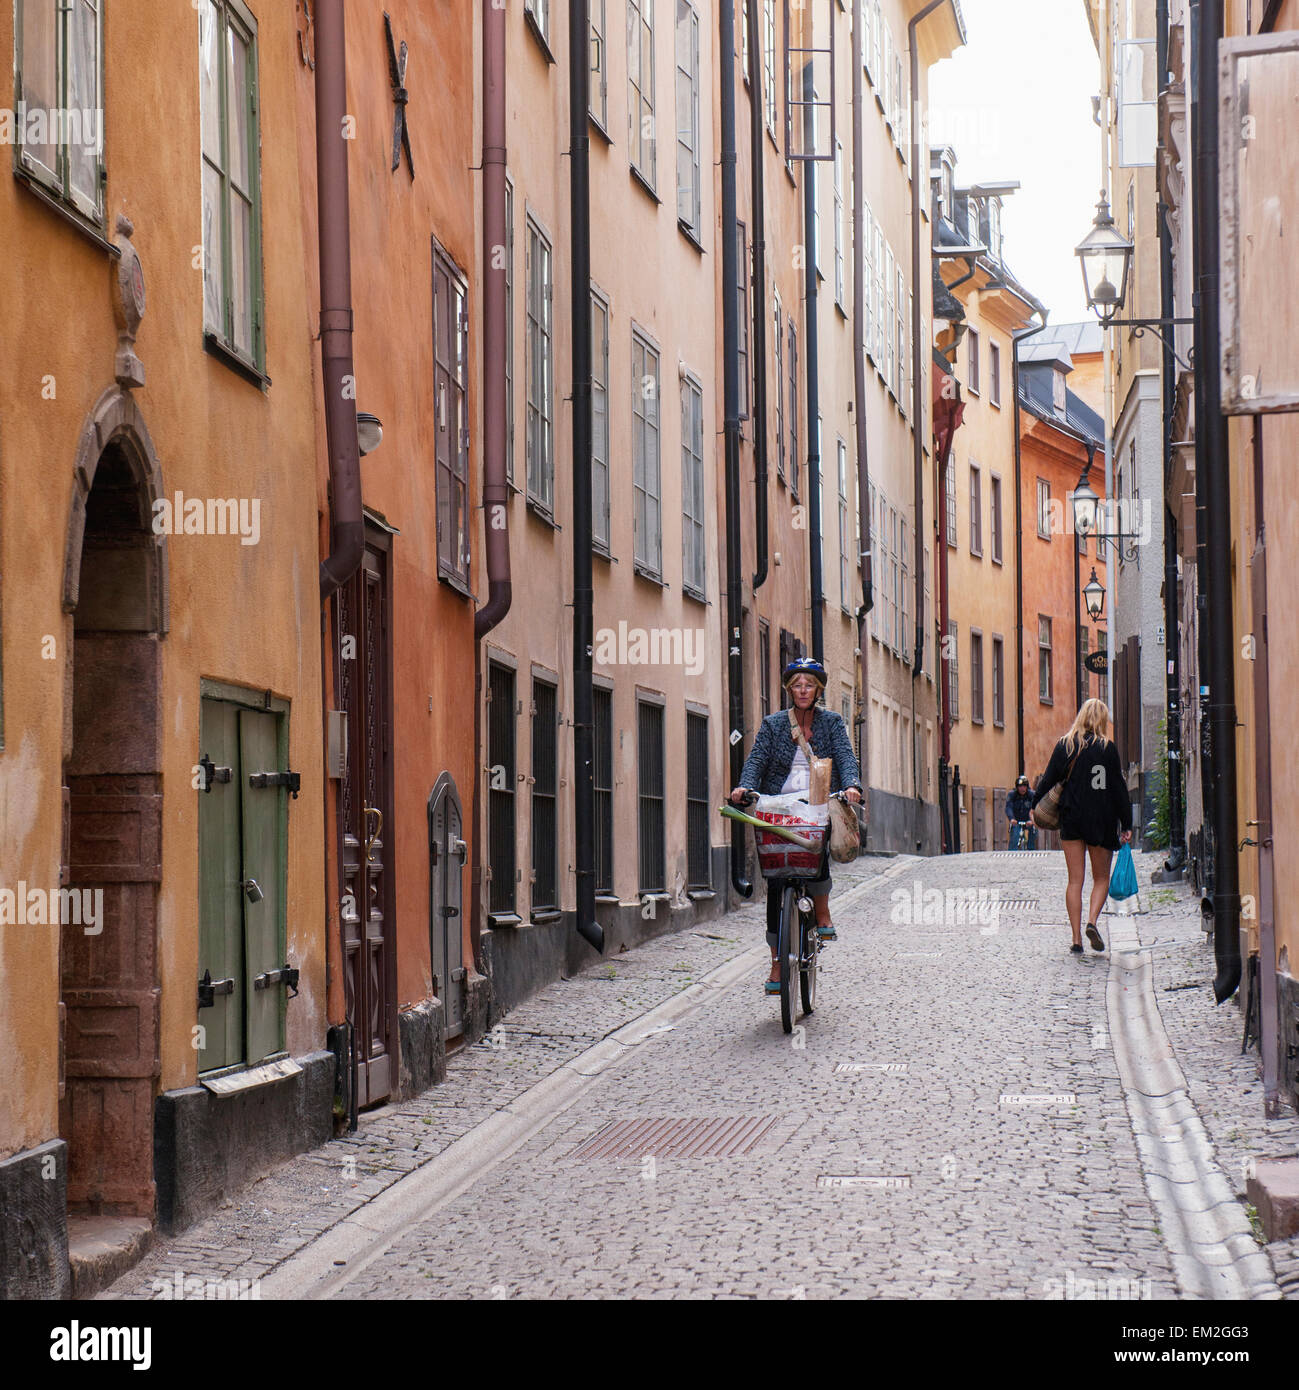 Pedestrian And Cyclists On A Narrow Street; Stockholm Sweden Stock Photo